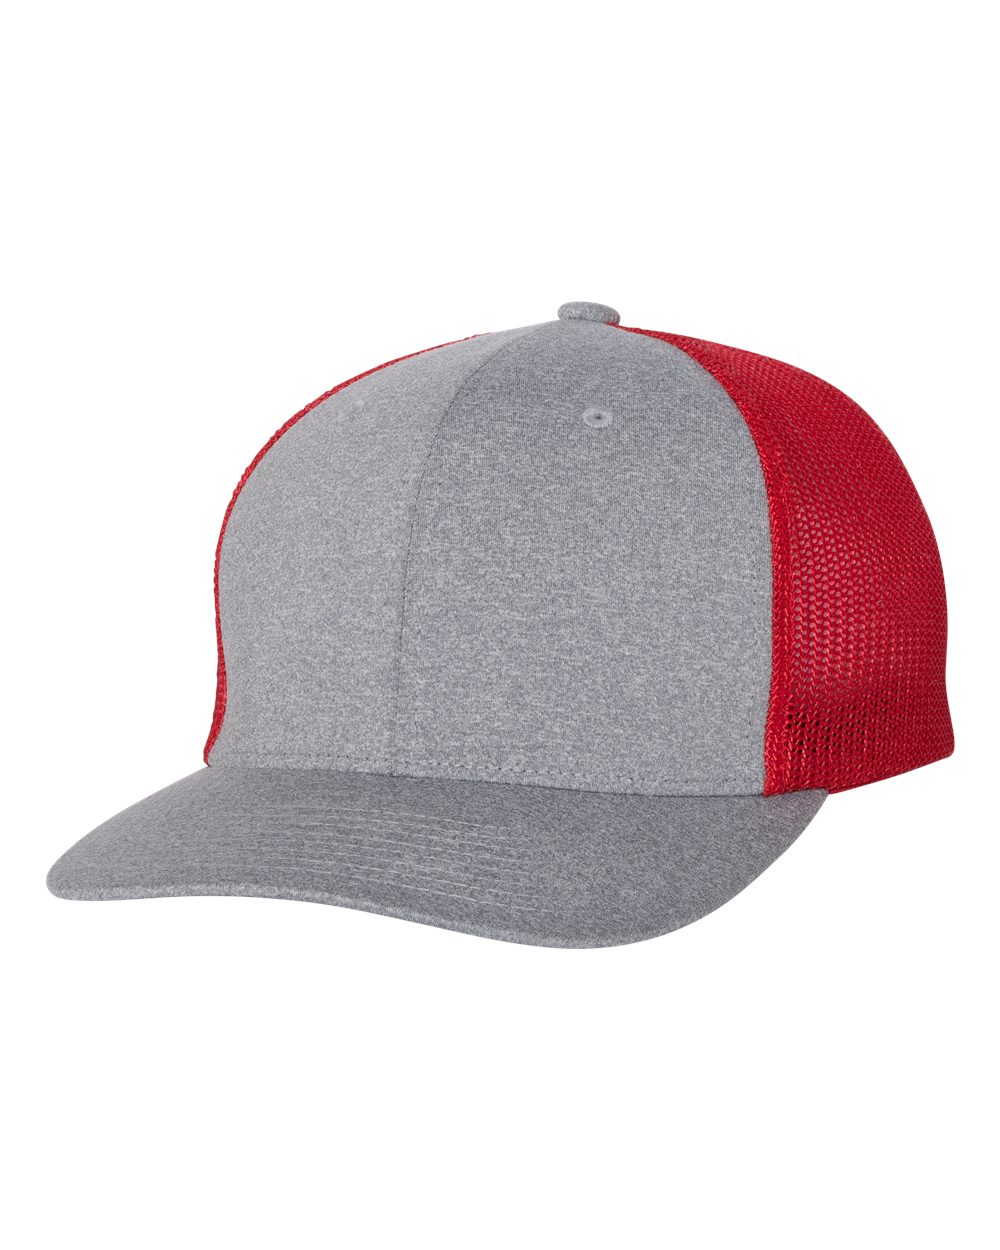 click to view Heather Grey/ Red